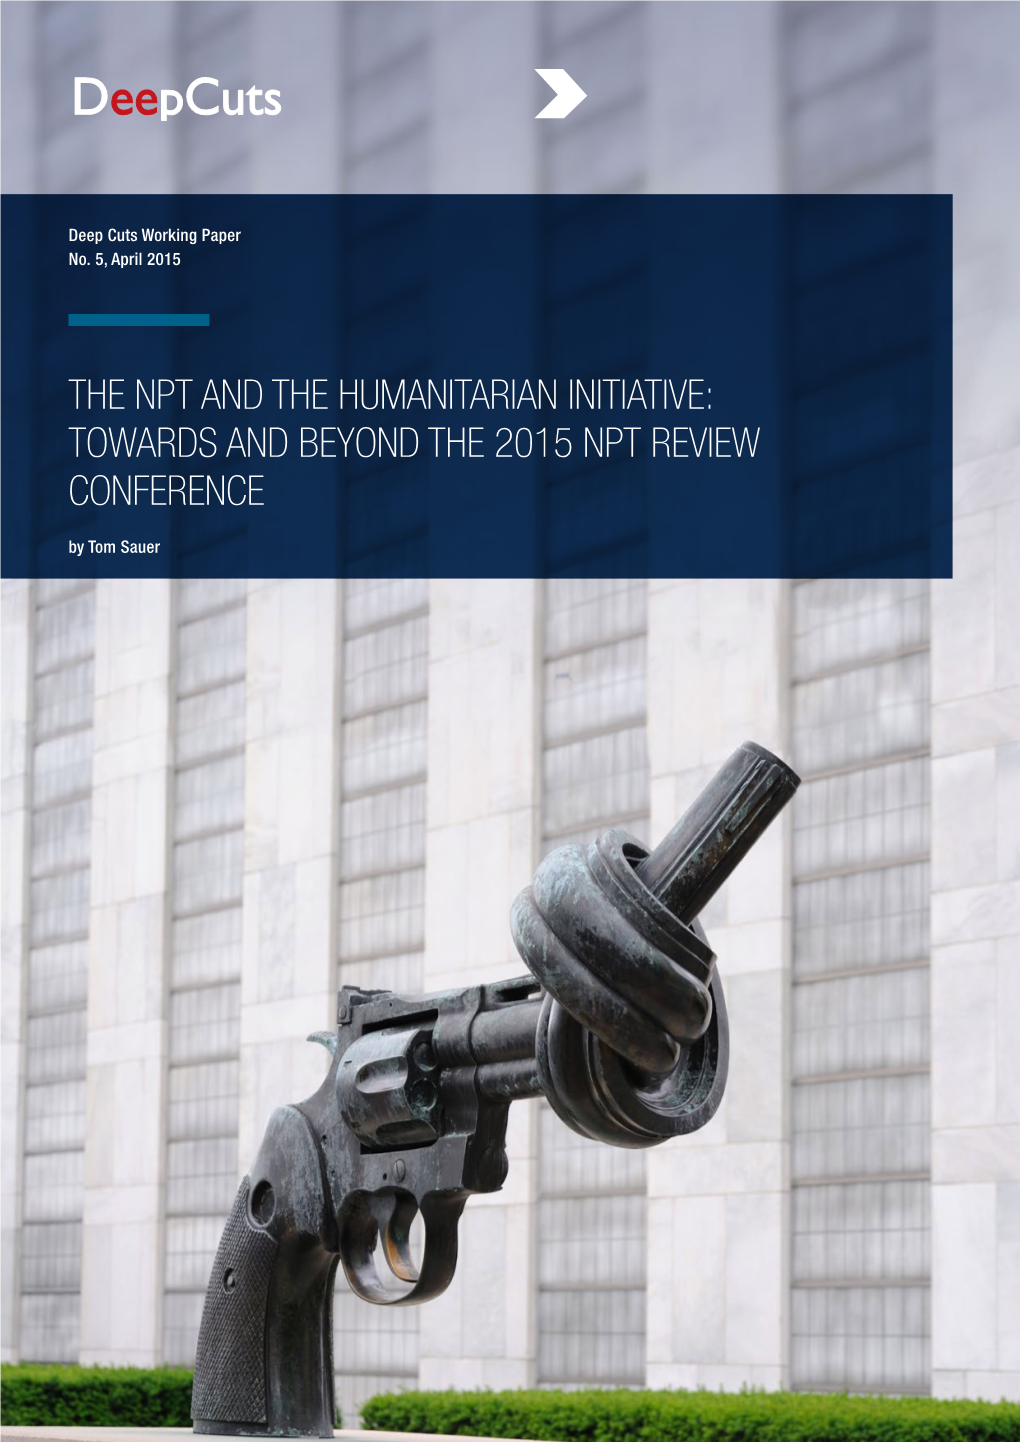 The NPT and the Humanitarian Initiative: Towards and Beyond the 2015 NPT Review Conference by Tom Sauer the NPT and the Humanitarian Initiative